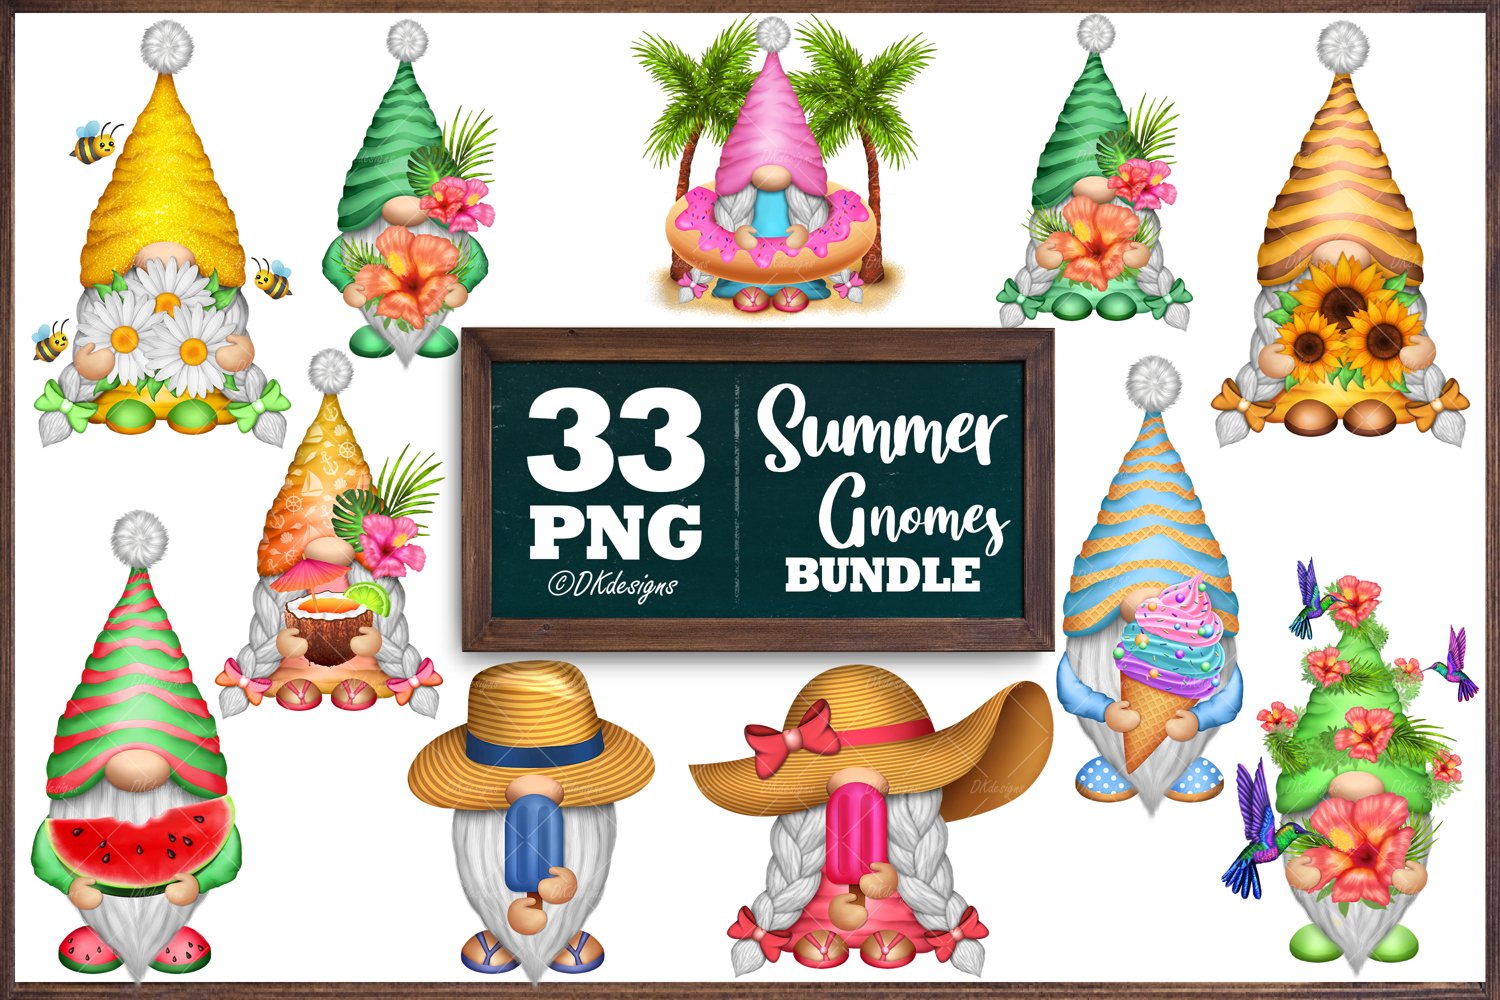 This set includes 33 PNG illustrations.